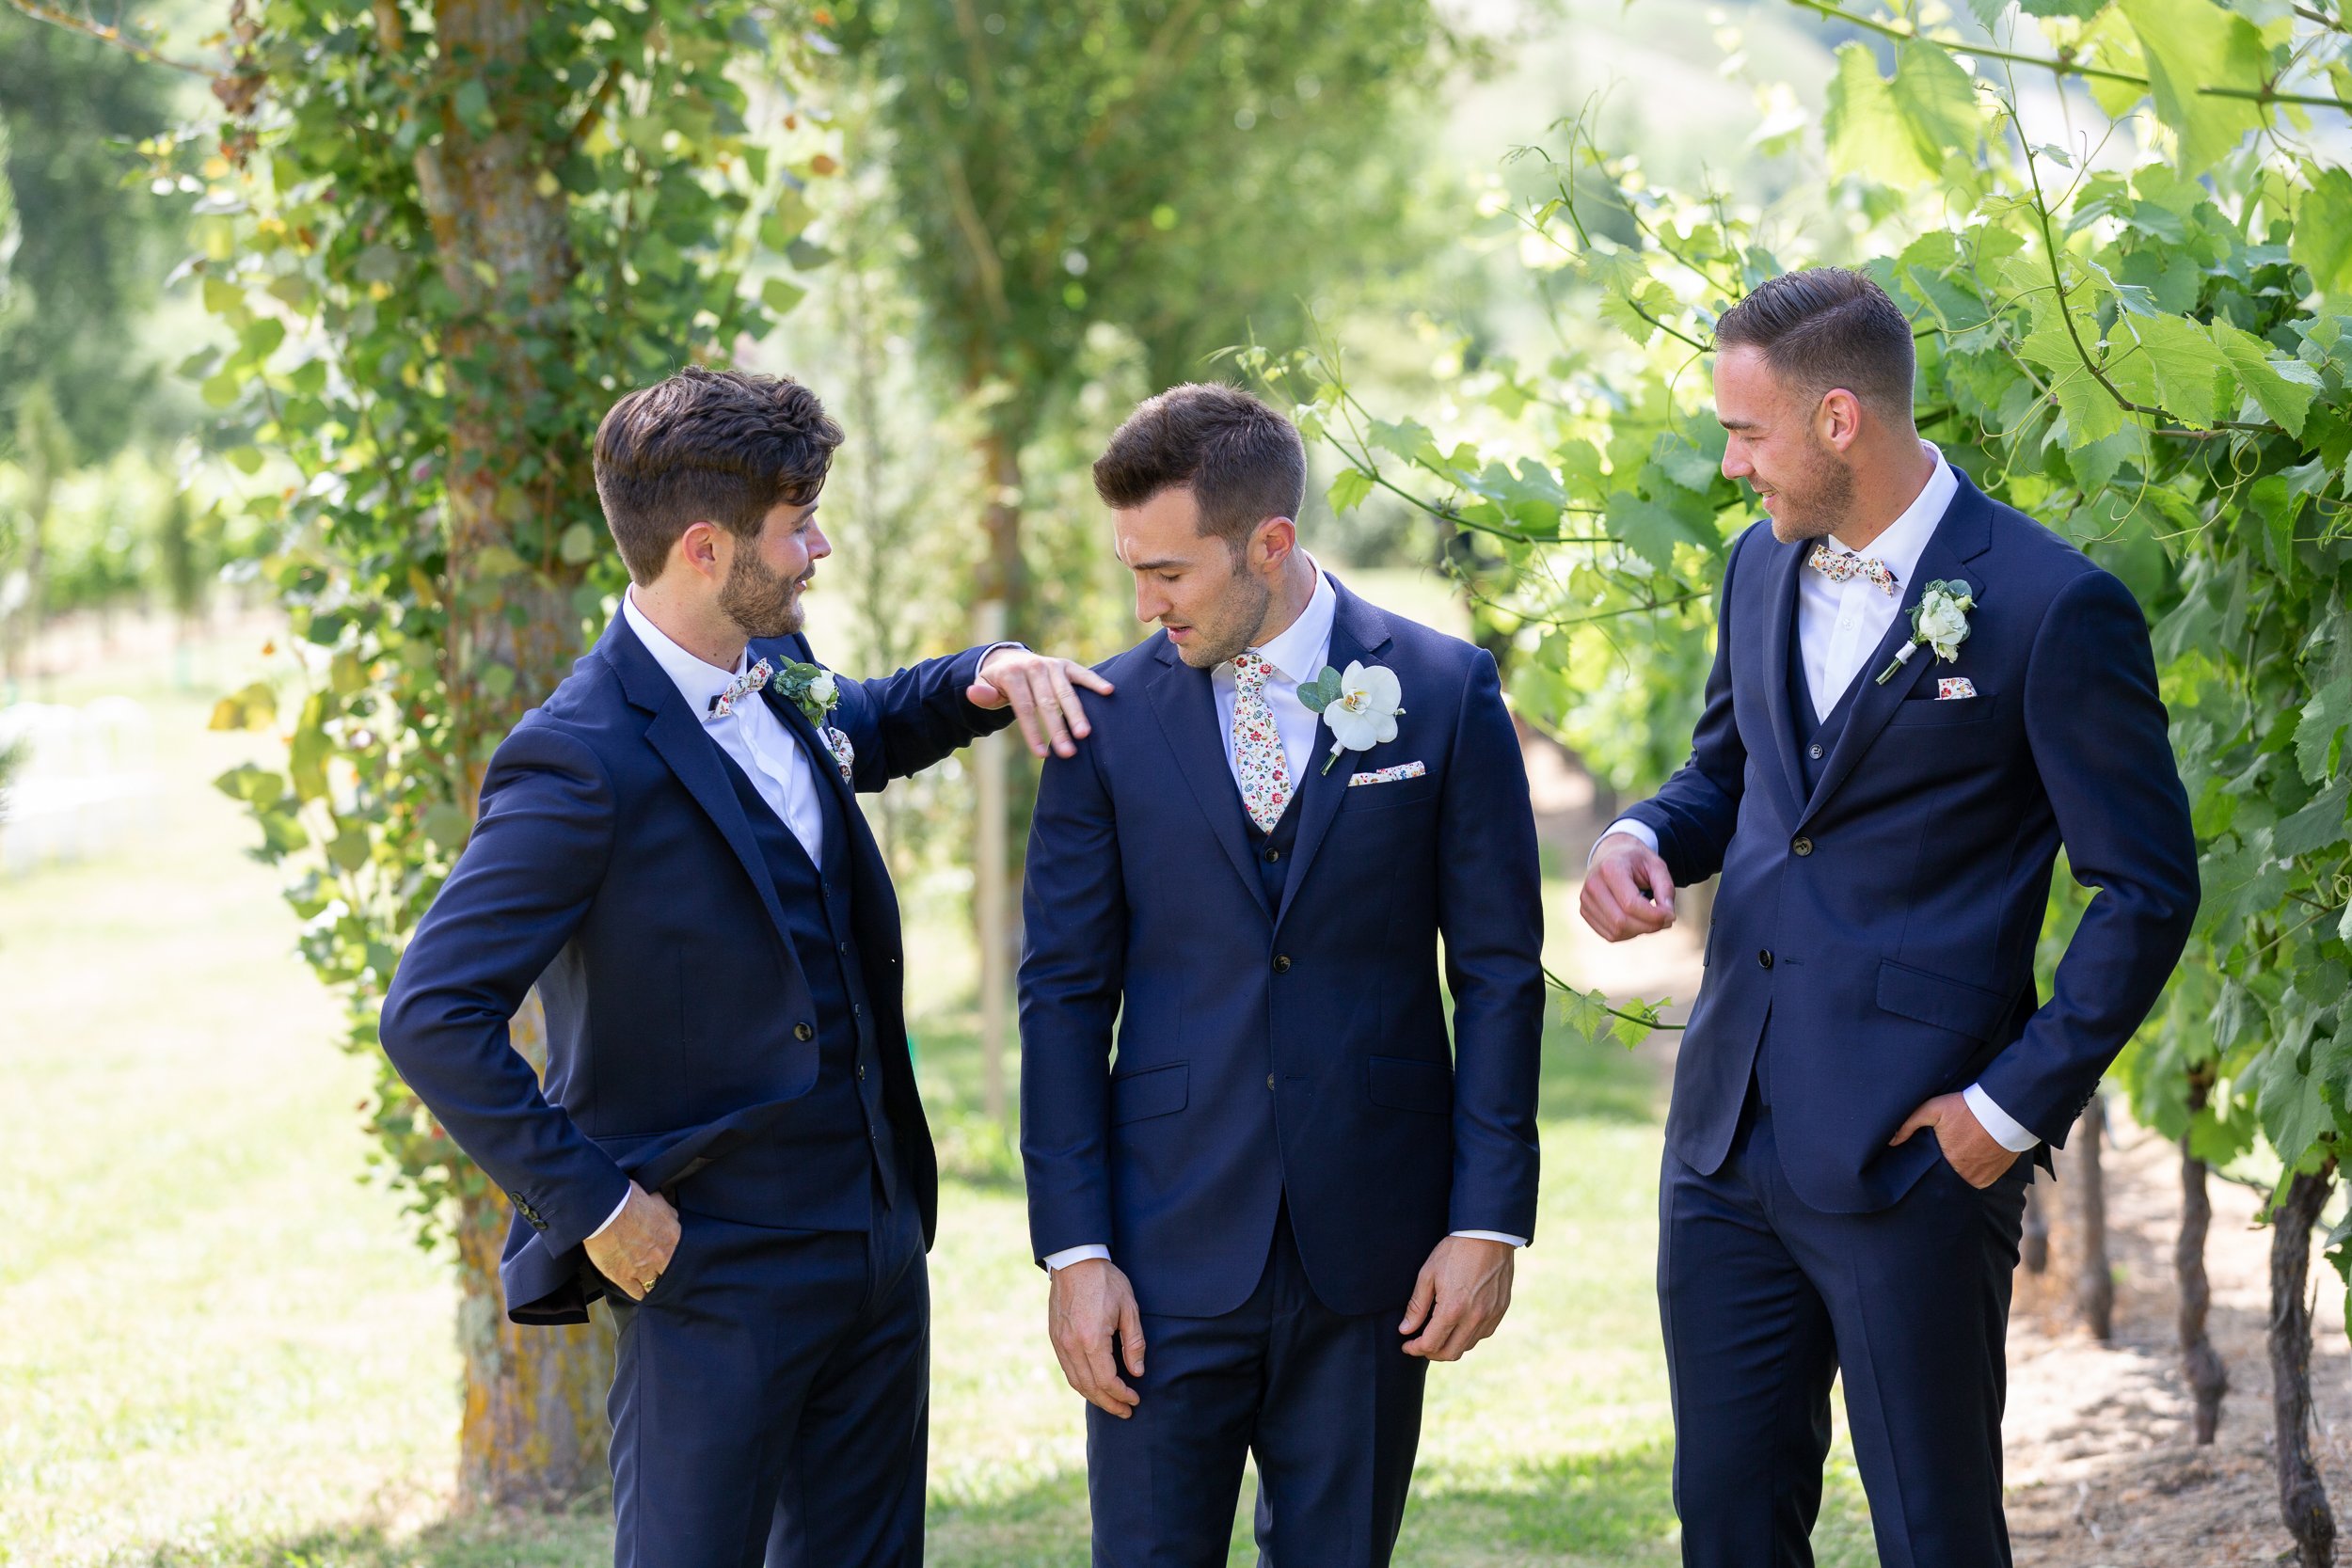 barkers-wedding-suits-hawkes-bay-photographer